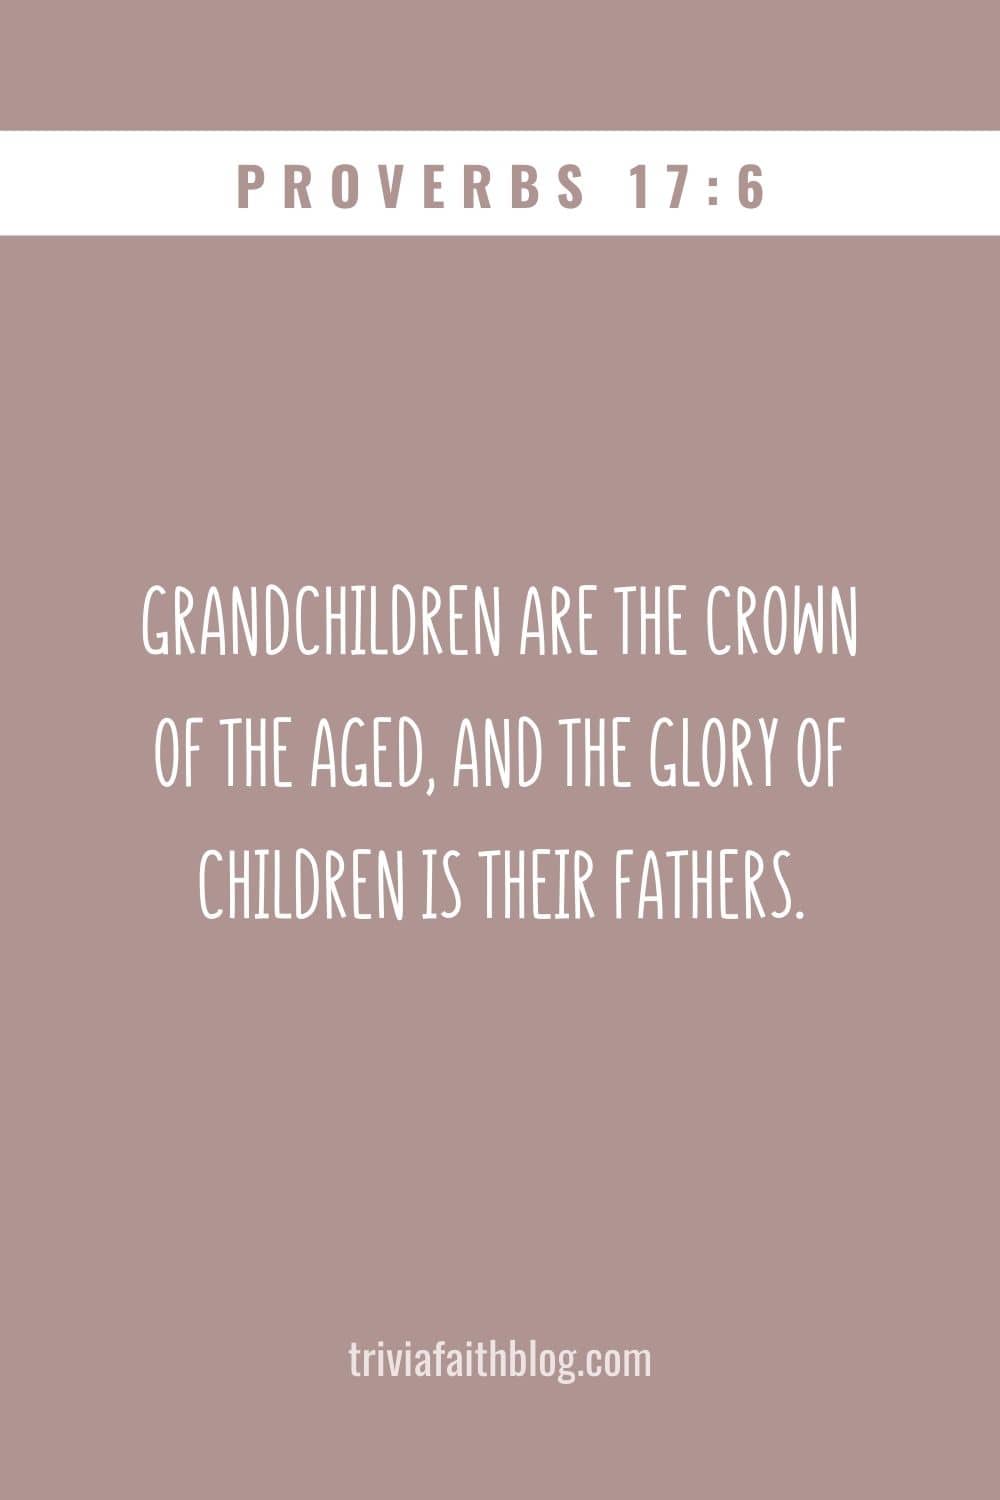 Grandchildren are the crown of the aged, and the glory of children is their fathers